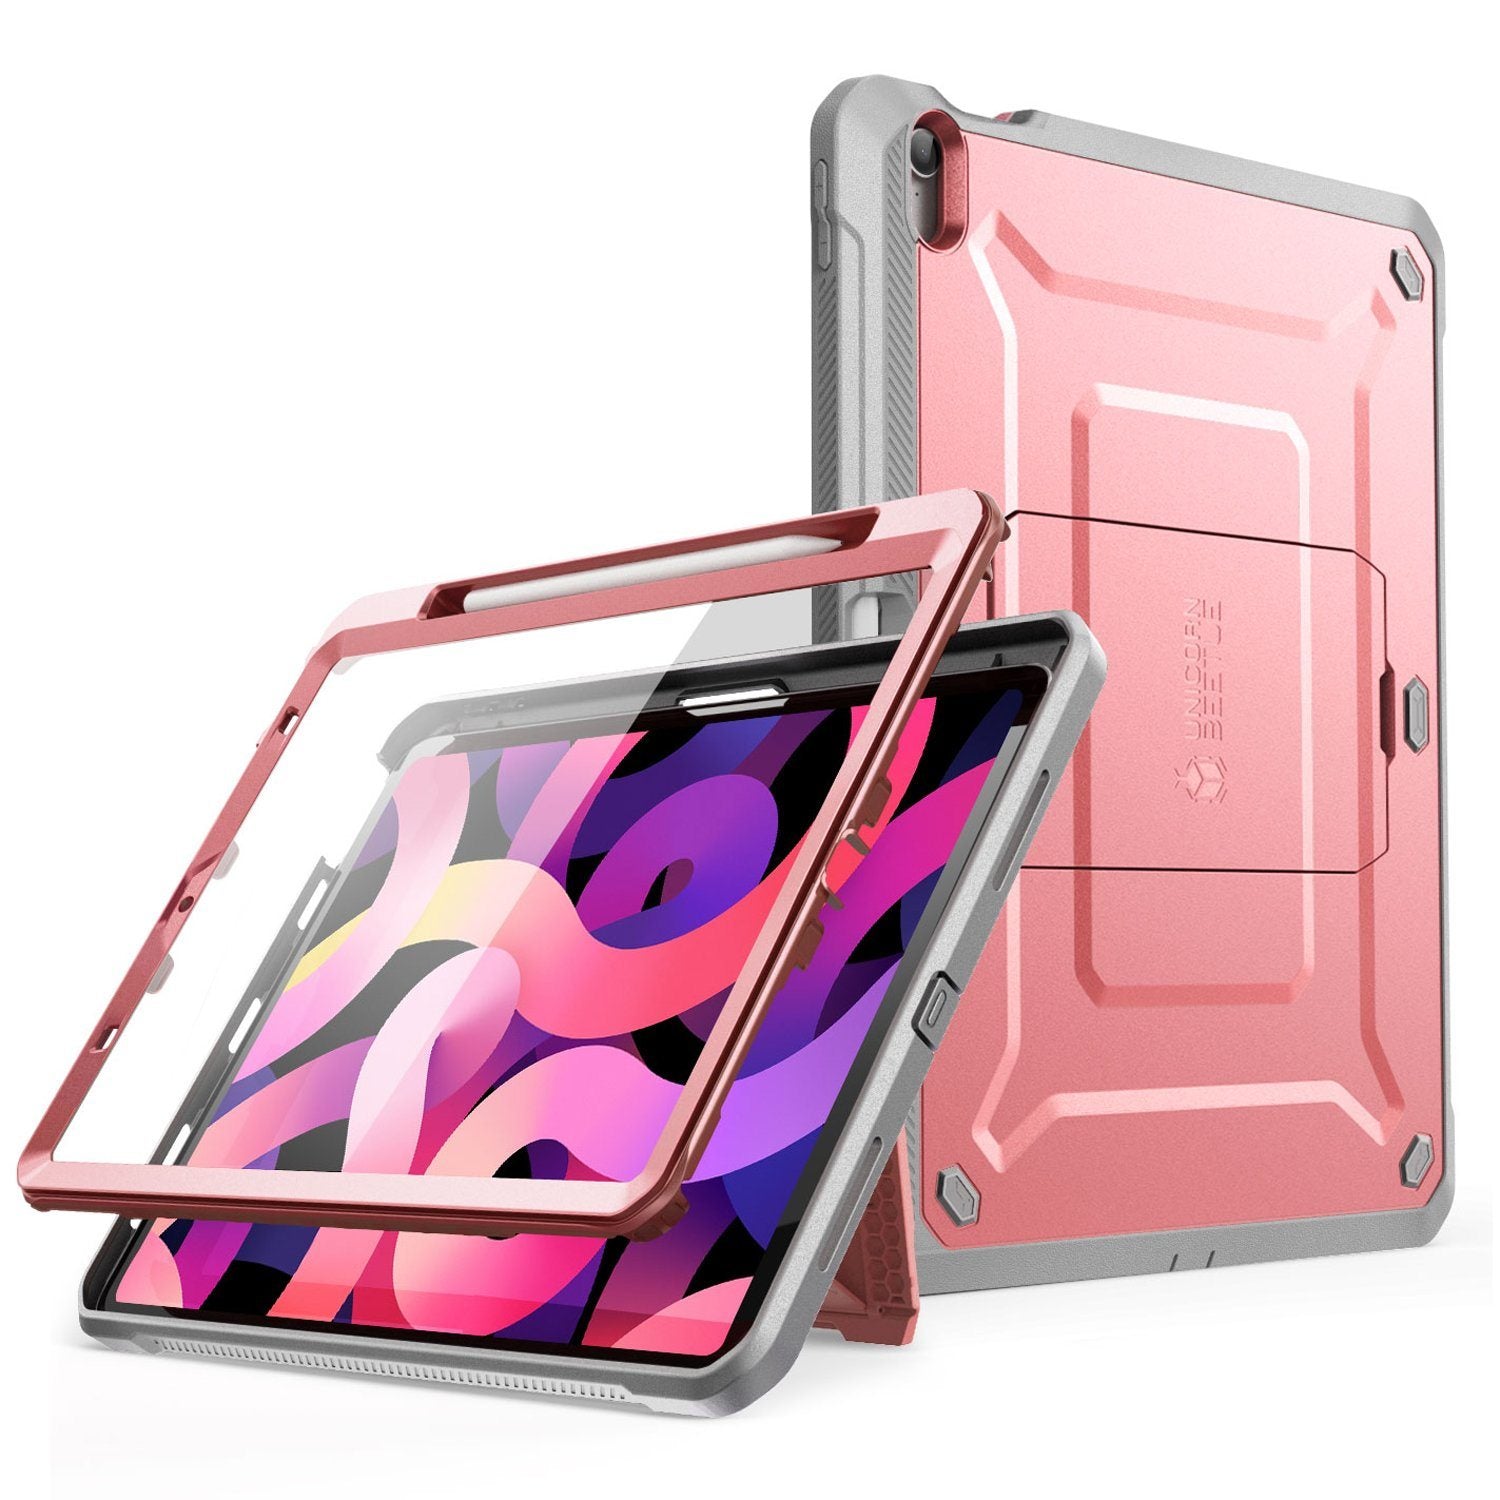 Supcase Unicorn Beetle Pro Series Full-Body Rugged Case with Kickstand for iPad Air 4 & iPad Air 5 Generation 10.9"(2020)